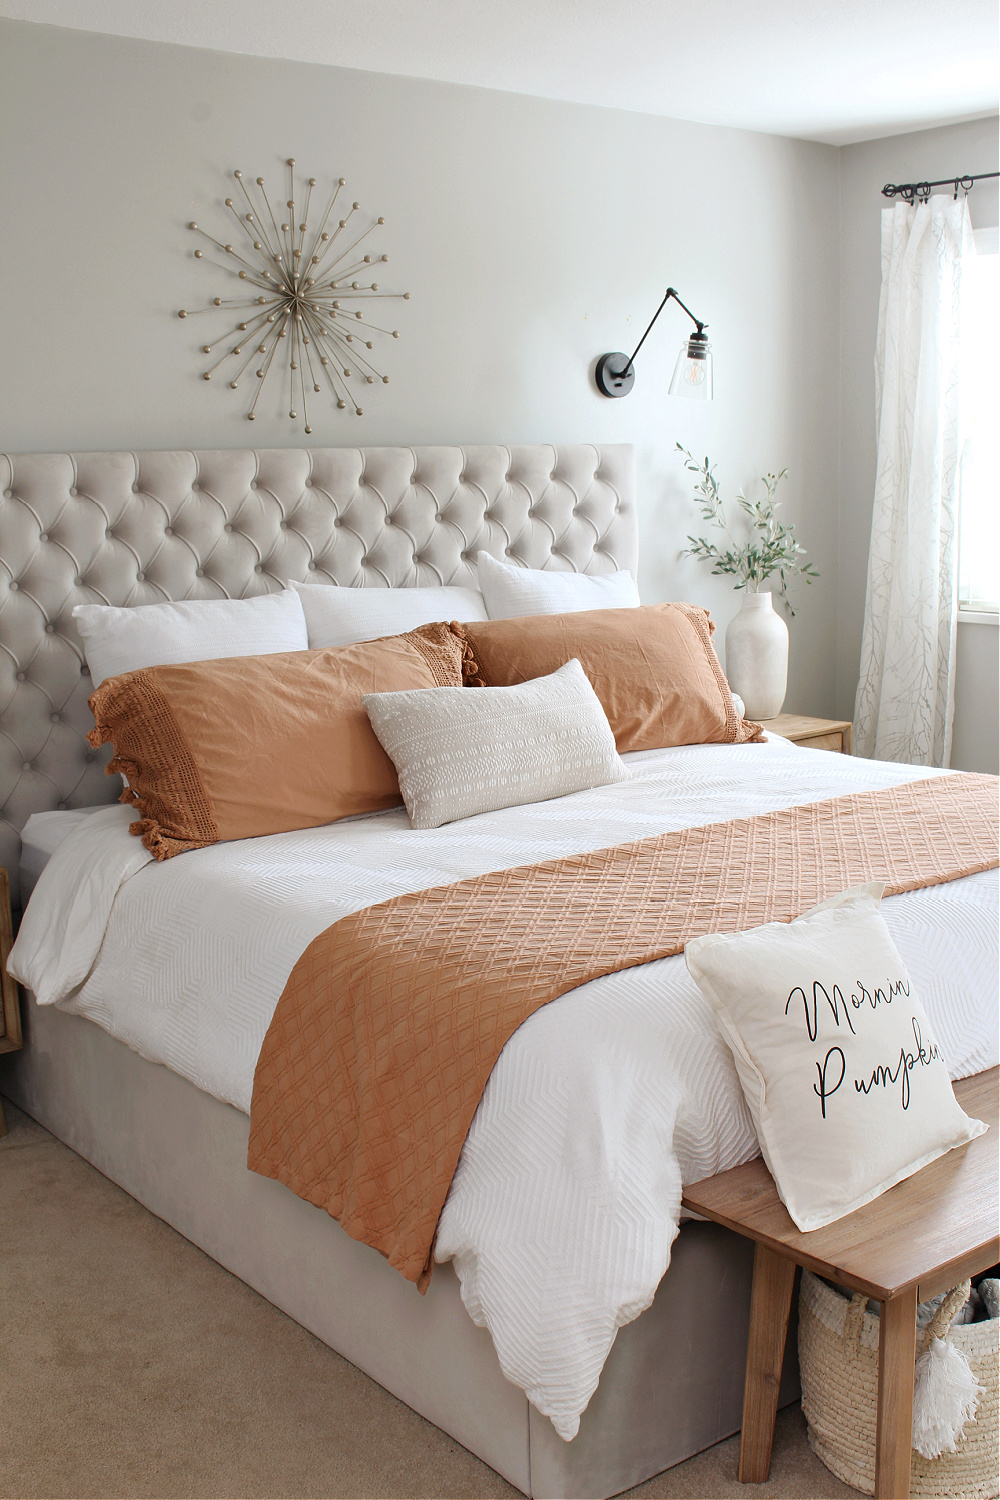 Upholstered bed dressed up for fall with a white duvet and terra cotta quilt and shams.